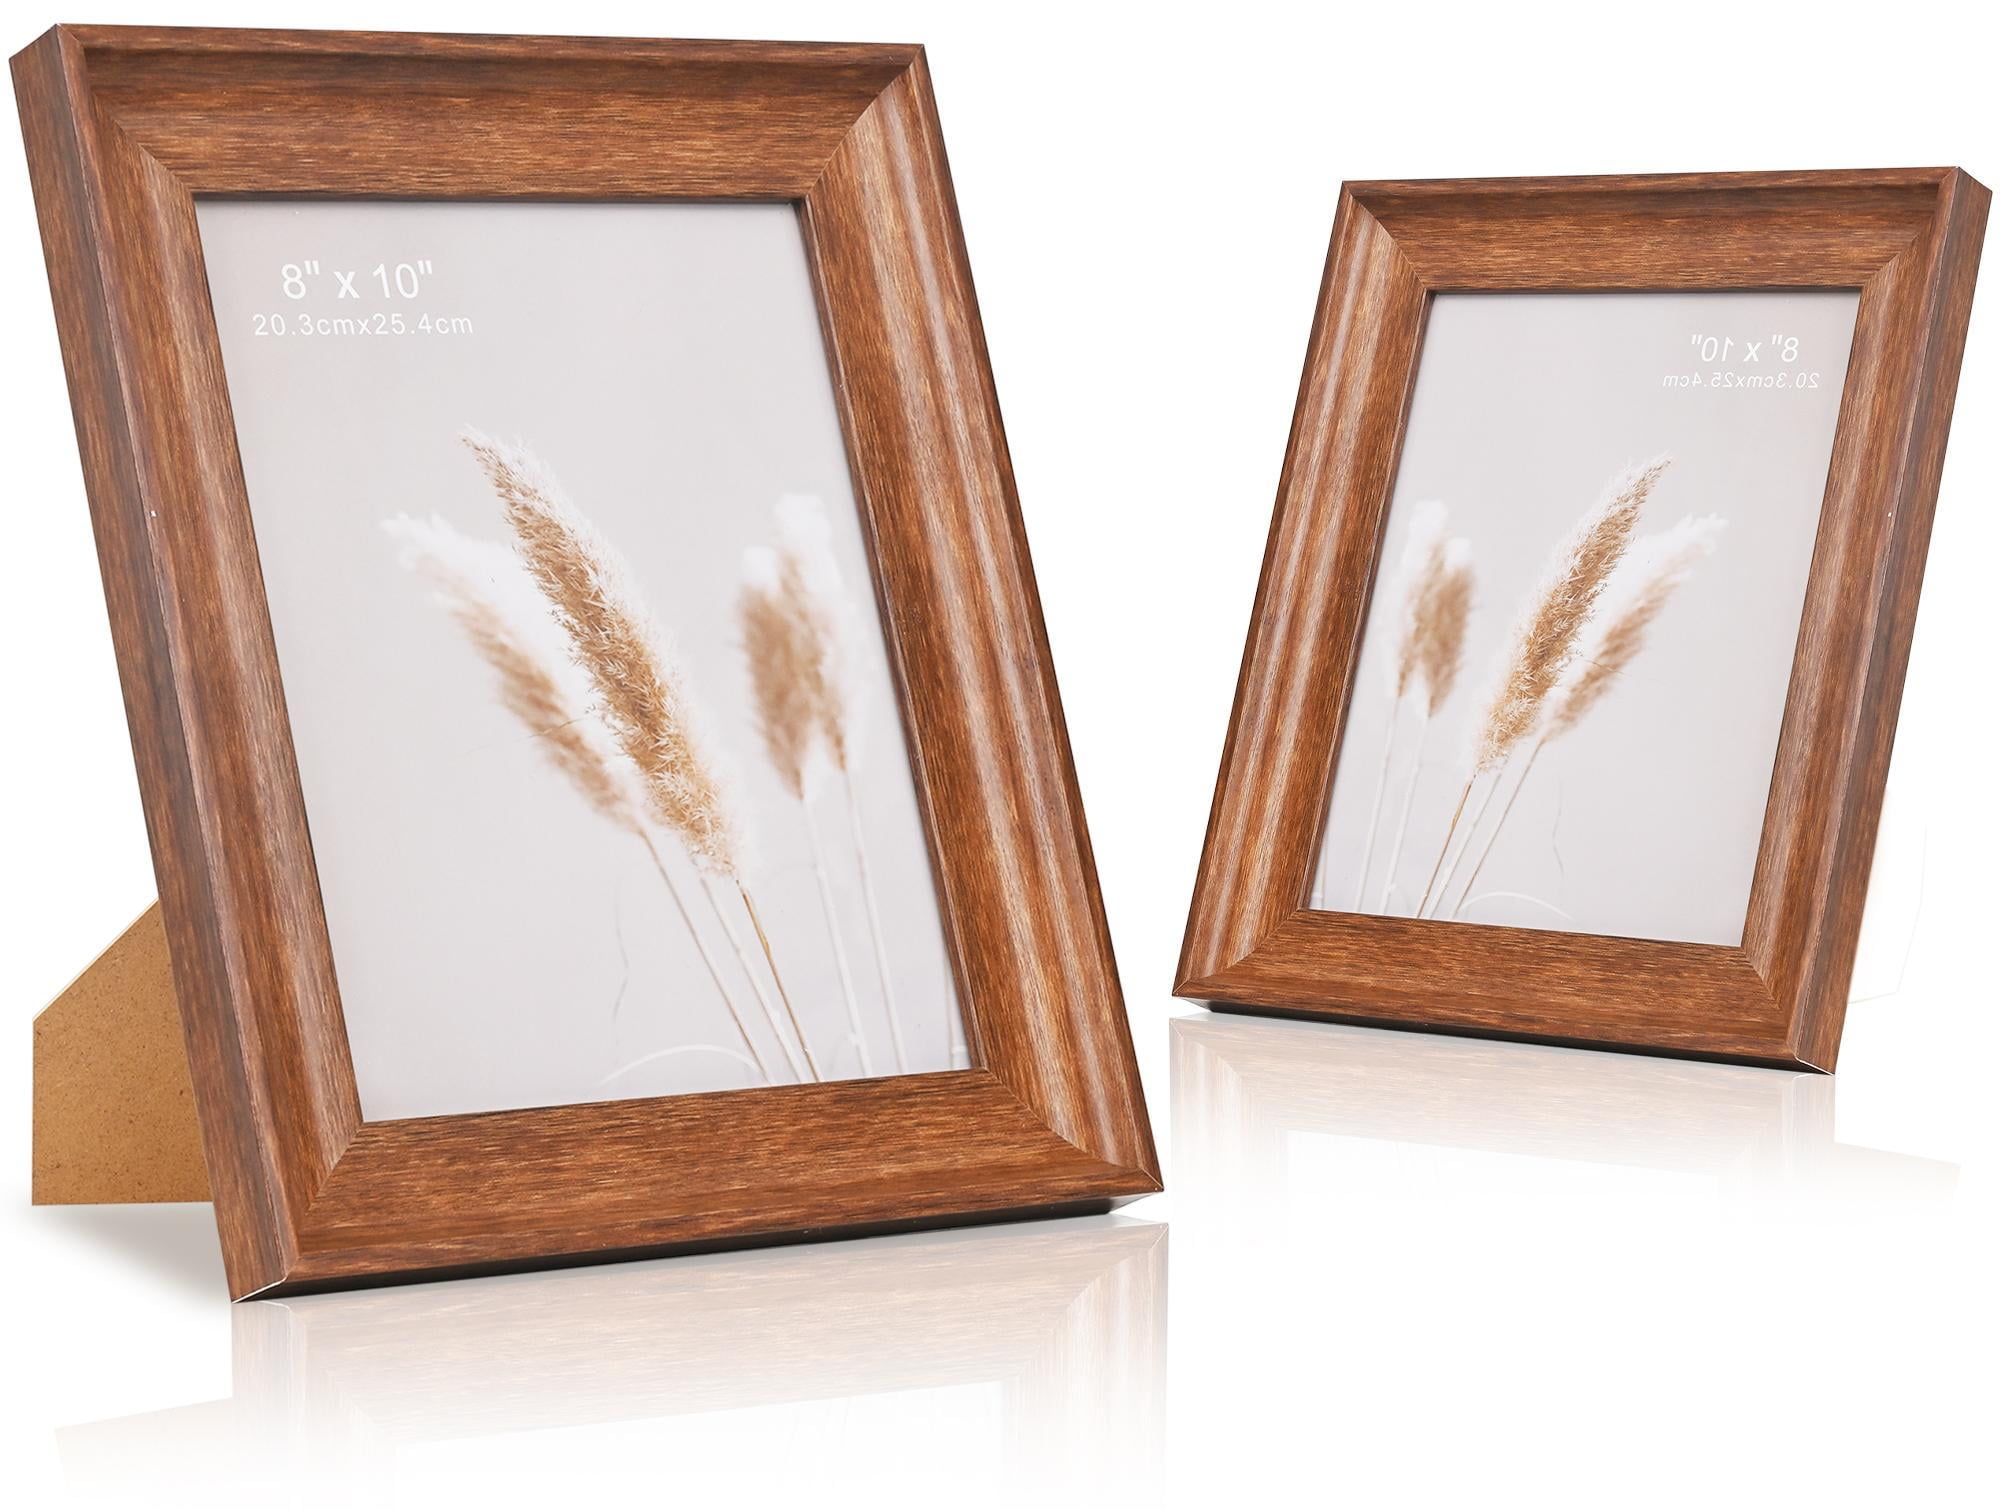 ArtbyHannah 2 Pack 8x10 inch Rustic Picture Frame Sets for Wall Mount or Tabletop Display, Mother's Day Gift Photo Frames for Home Decor